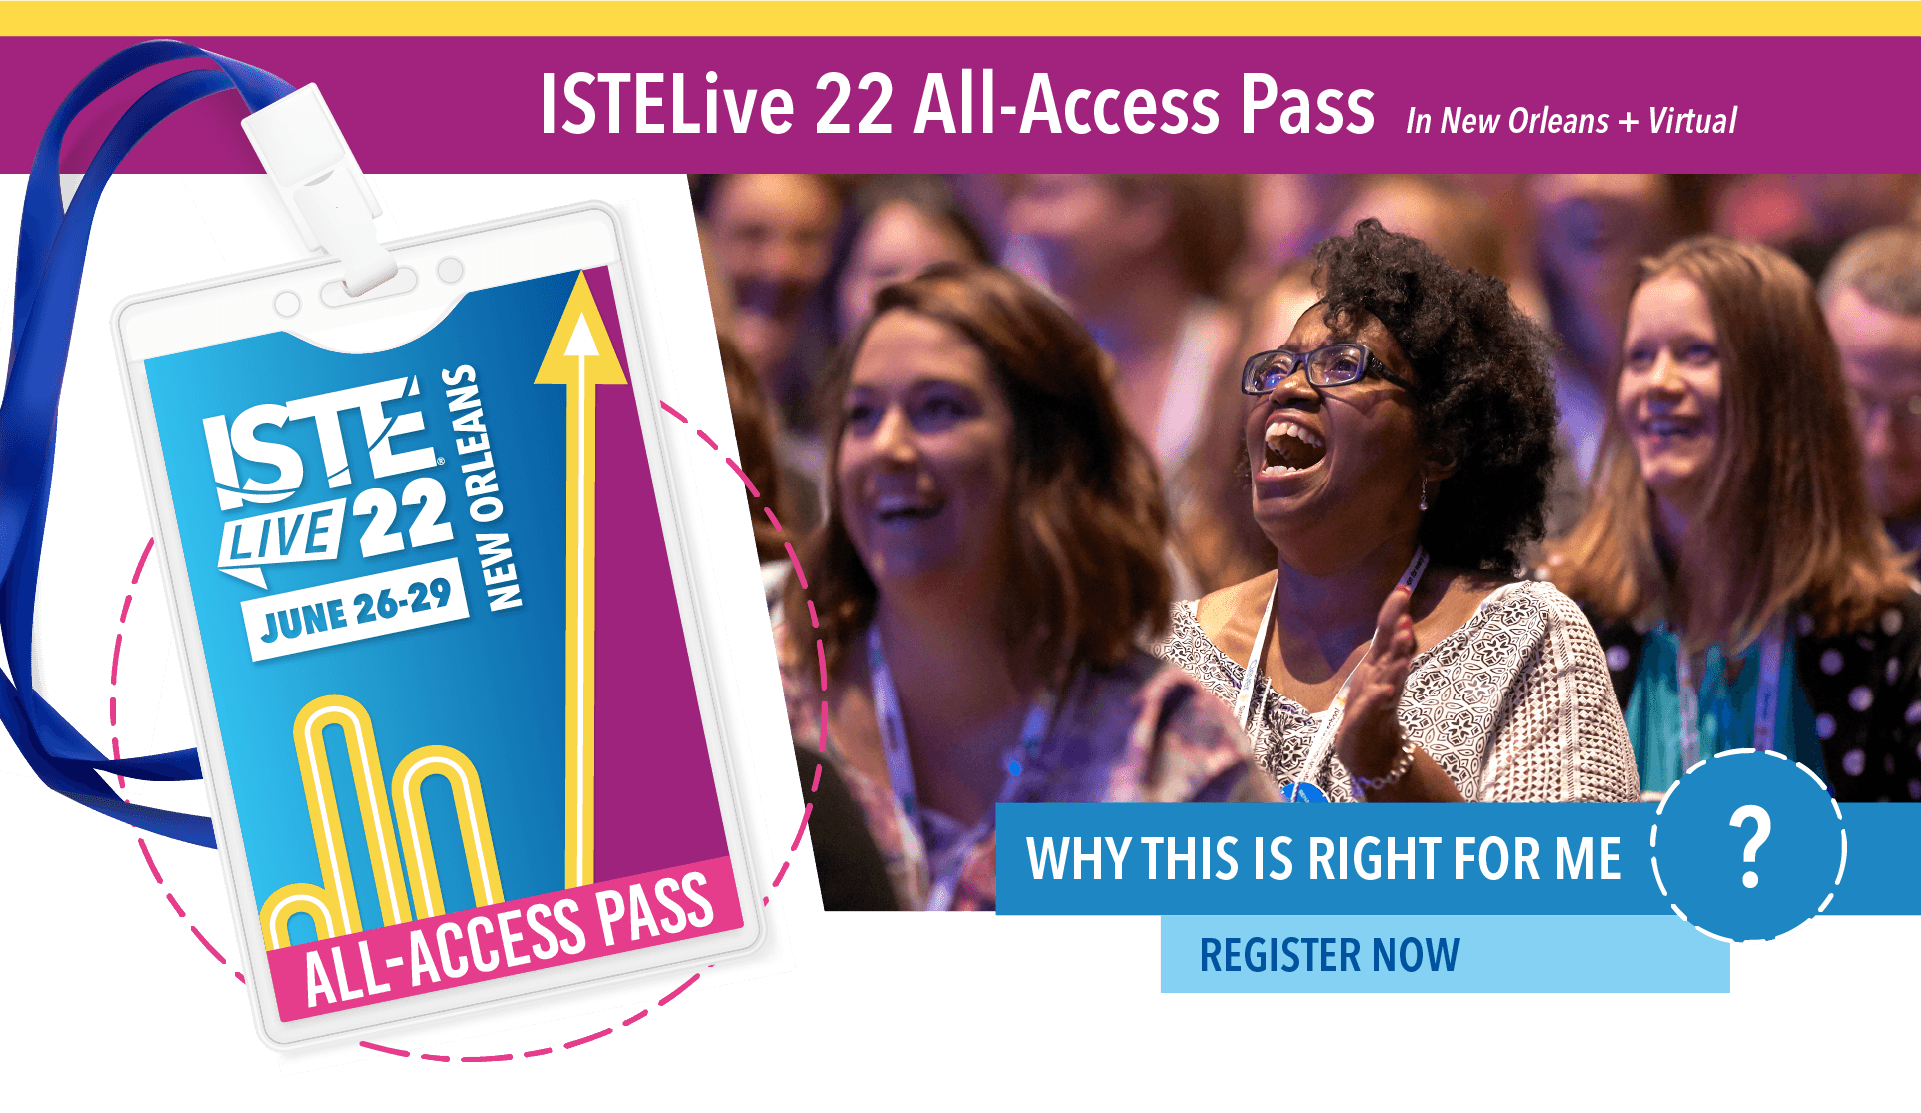 ISTELive 22 All-Access Pass in New Orleans and Virtual